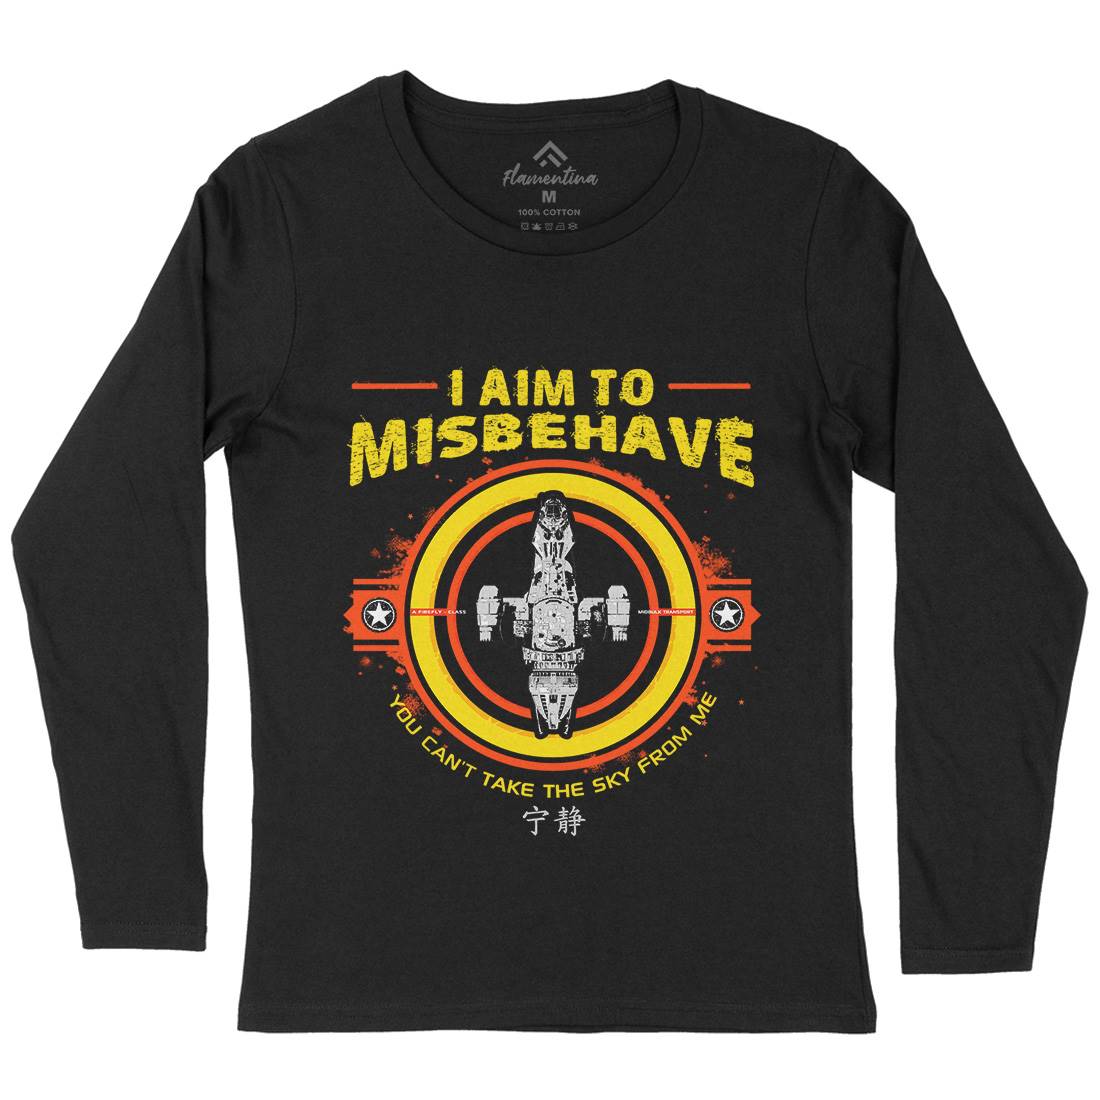 I Aim To Misbehave Womens Long Sleeve T-Shirt Space D352